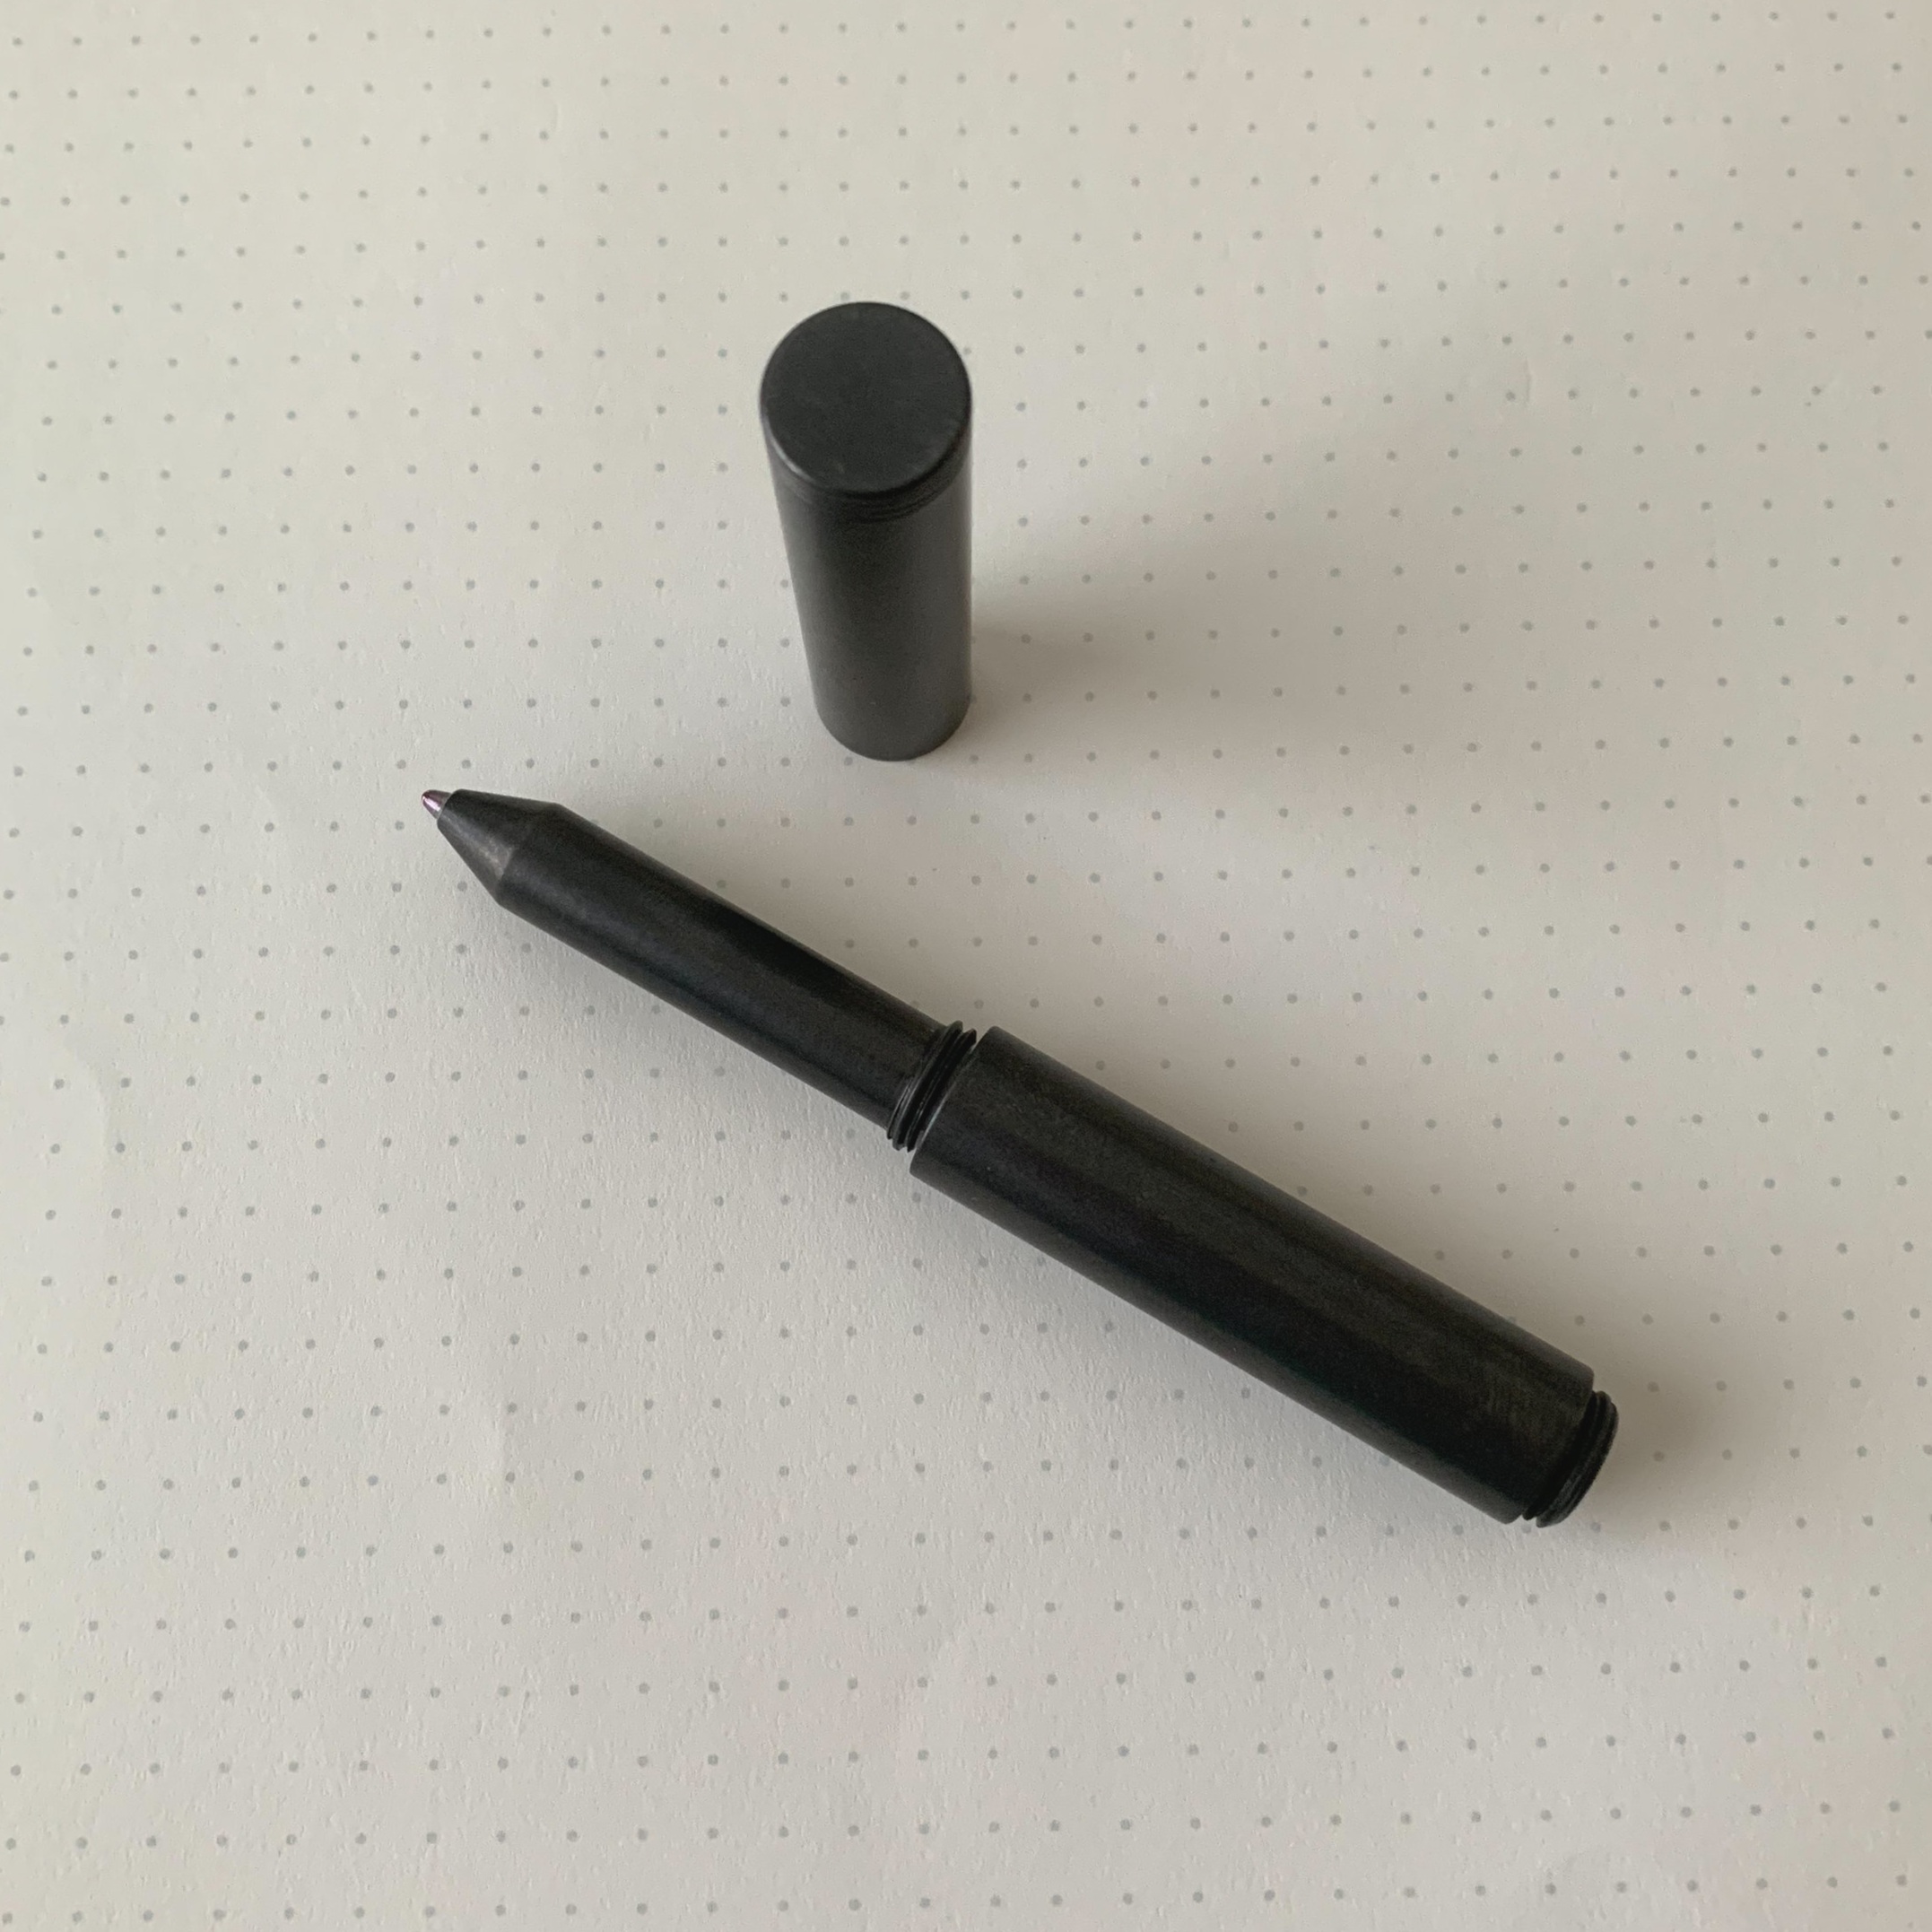 Pen Review: Schon DSGN Classic Machined Pen in PVD DLC Stainless